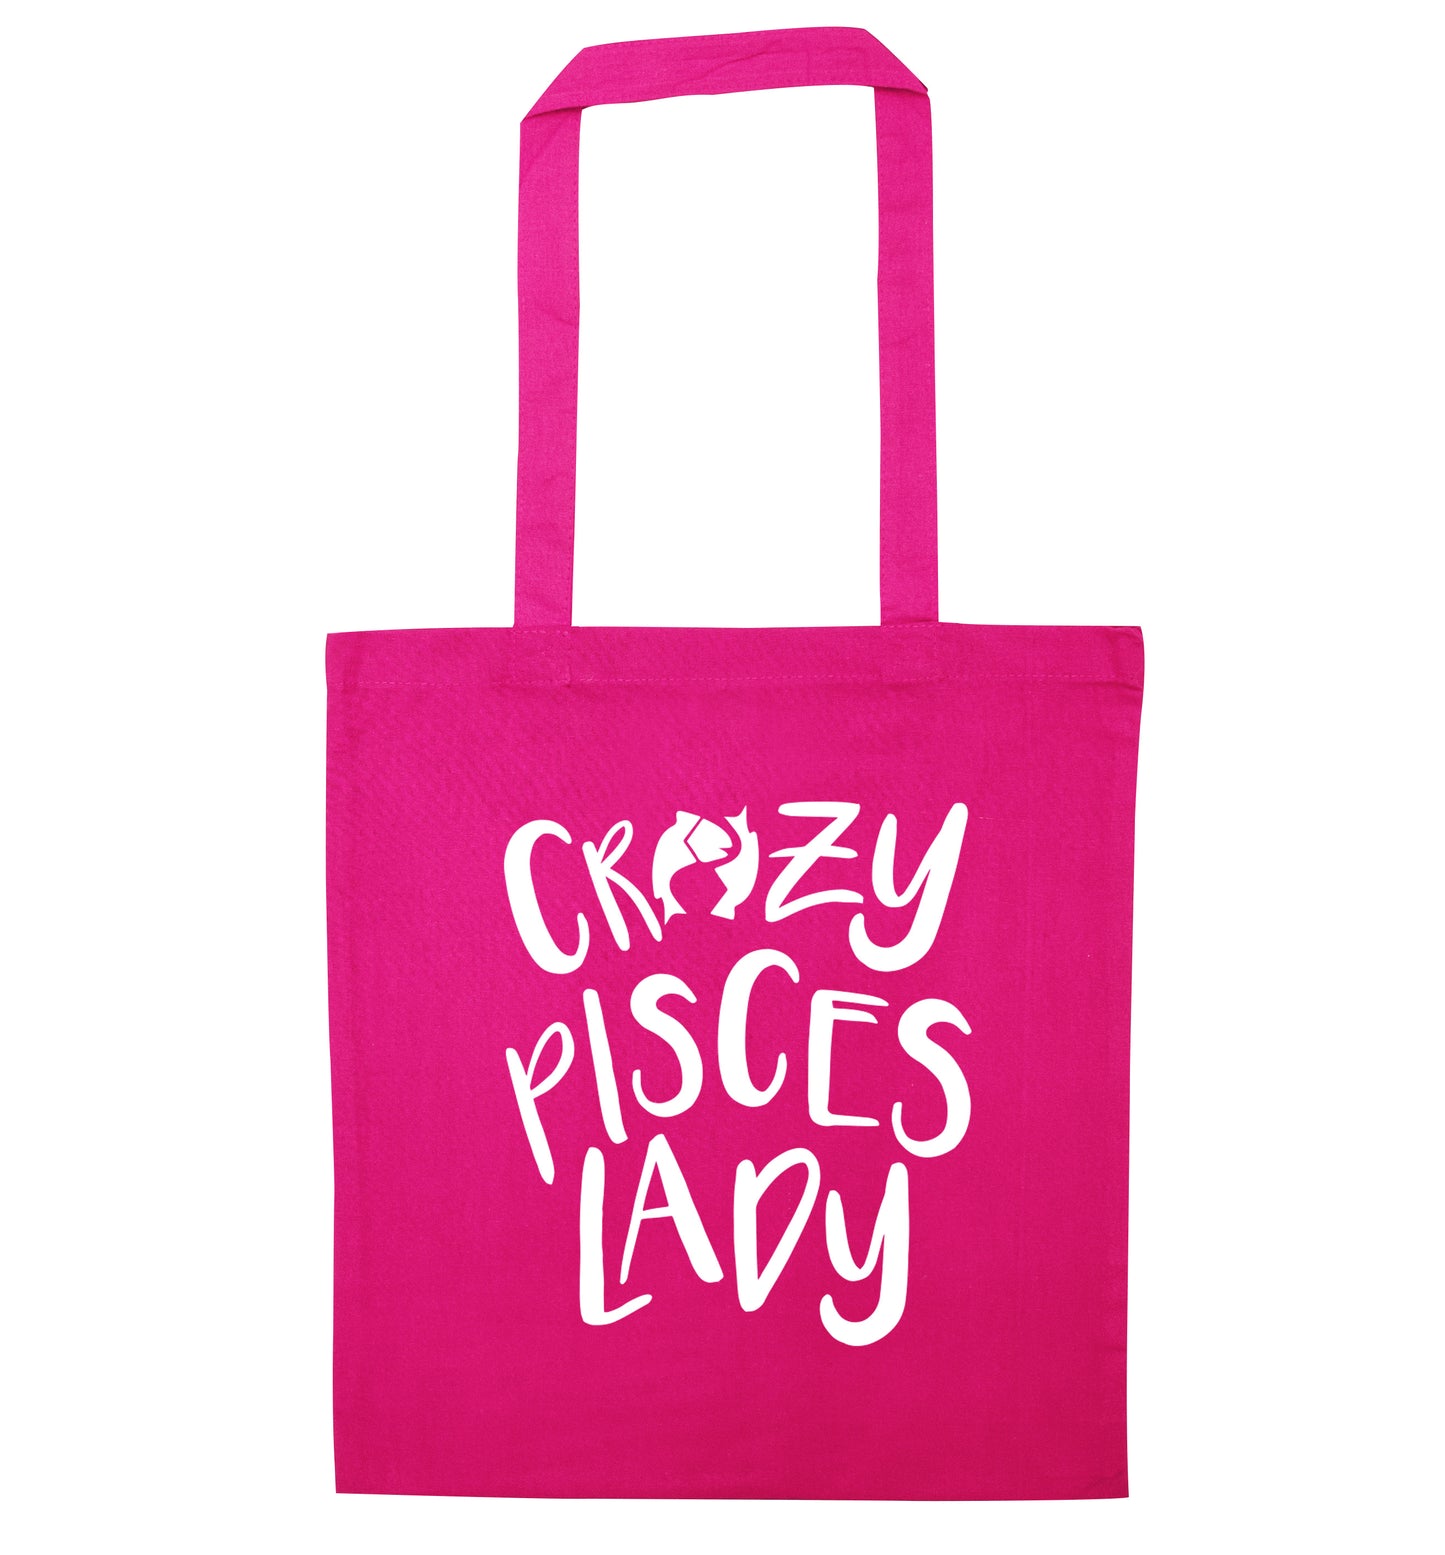 Crazy pisces Lady pink tote bag